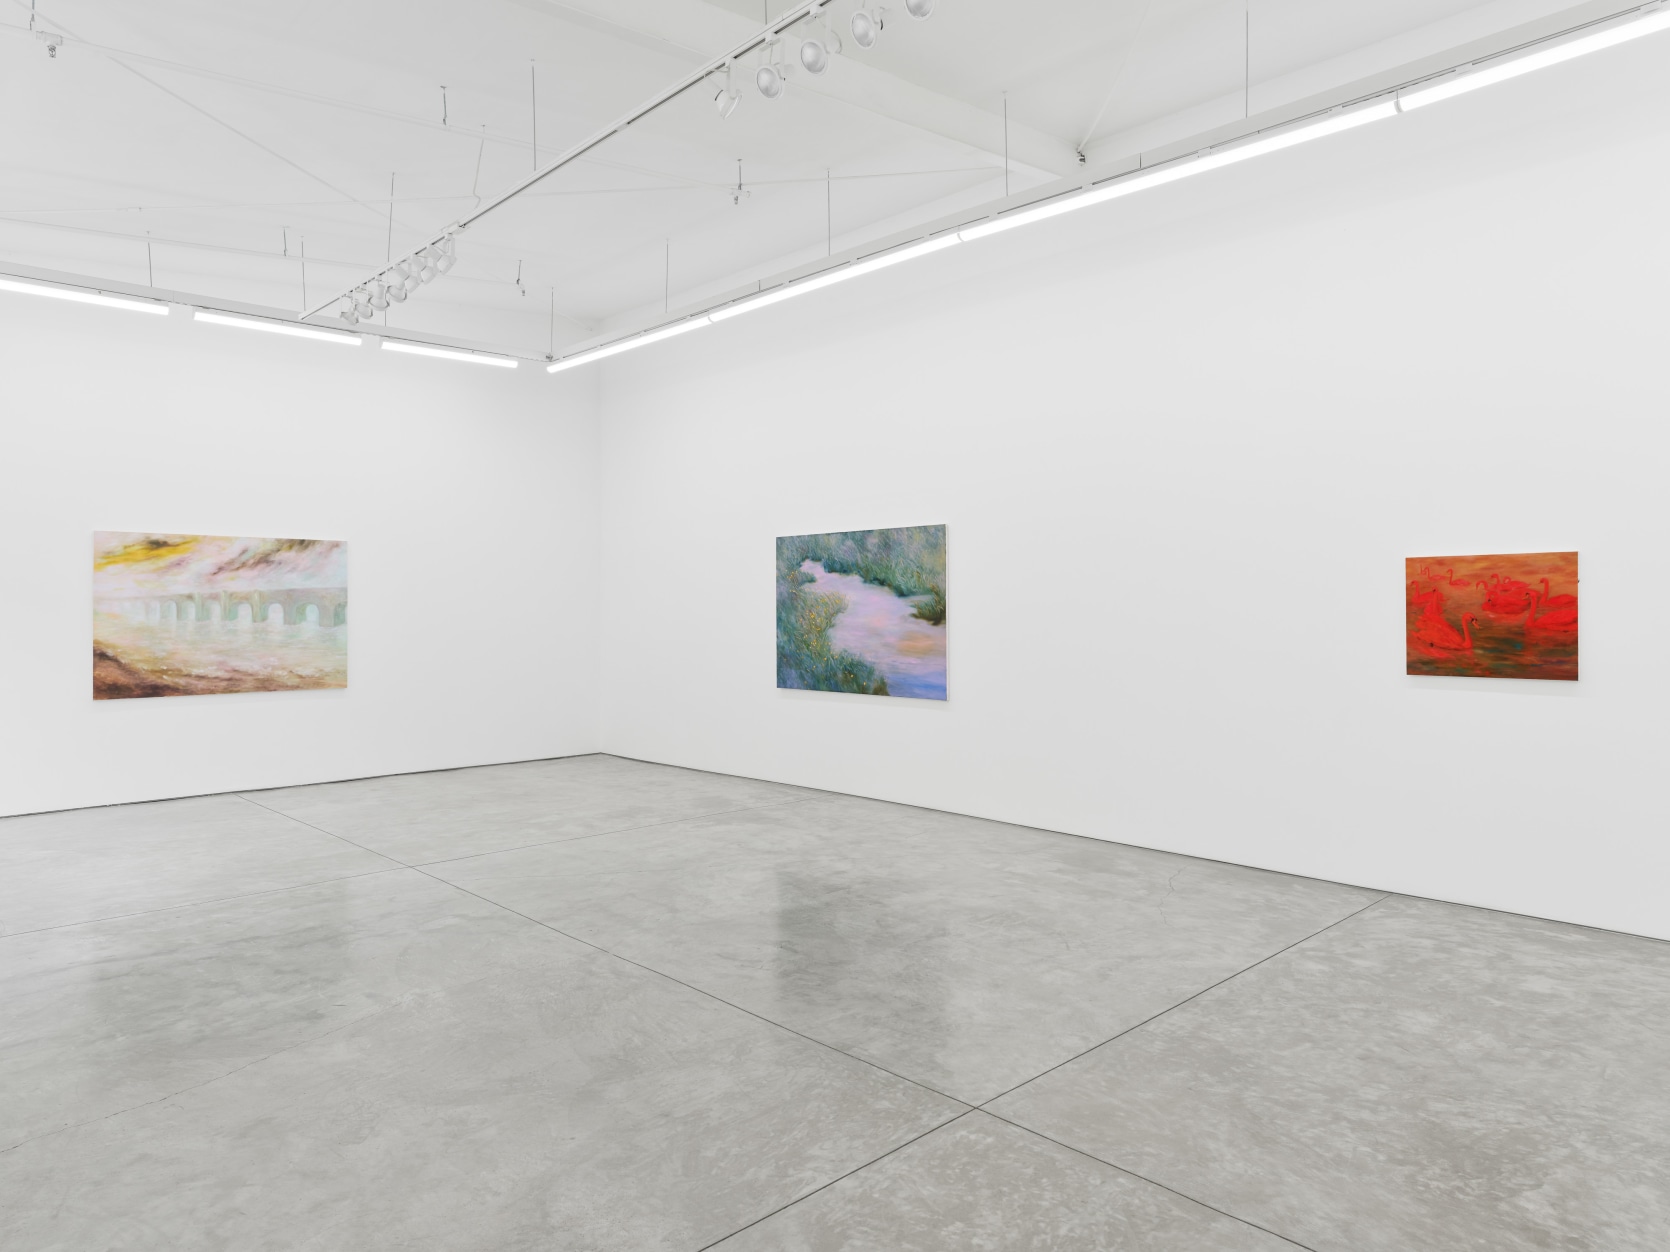 Installation view of Coco Young's "Passage" at Night Gallery.